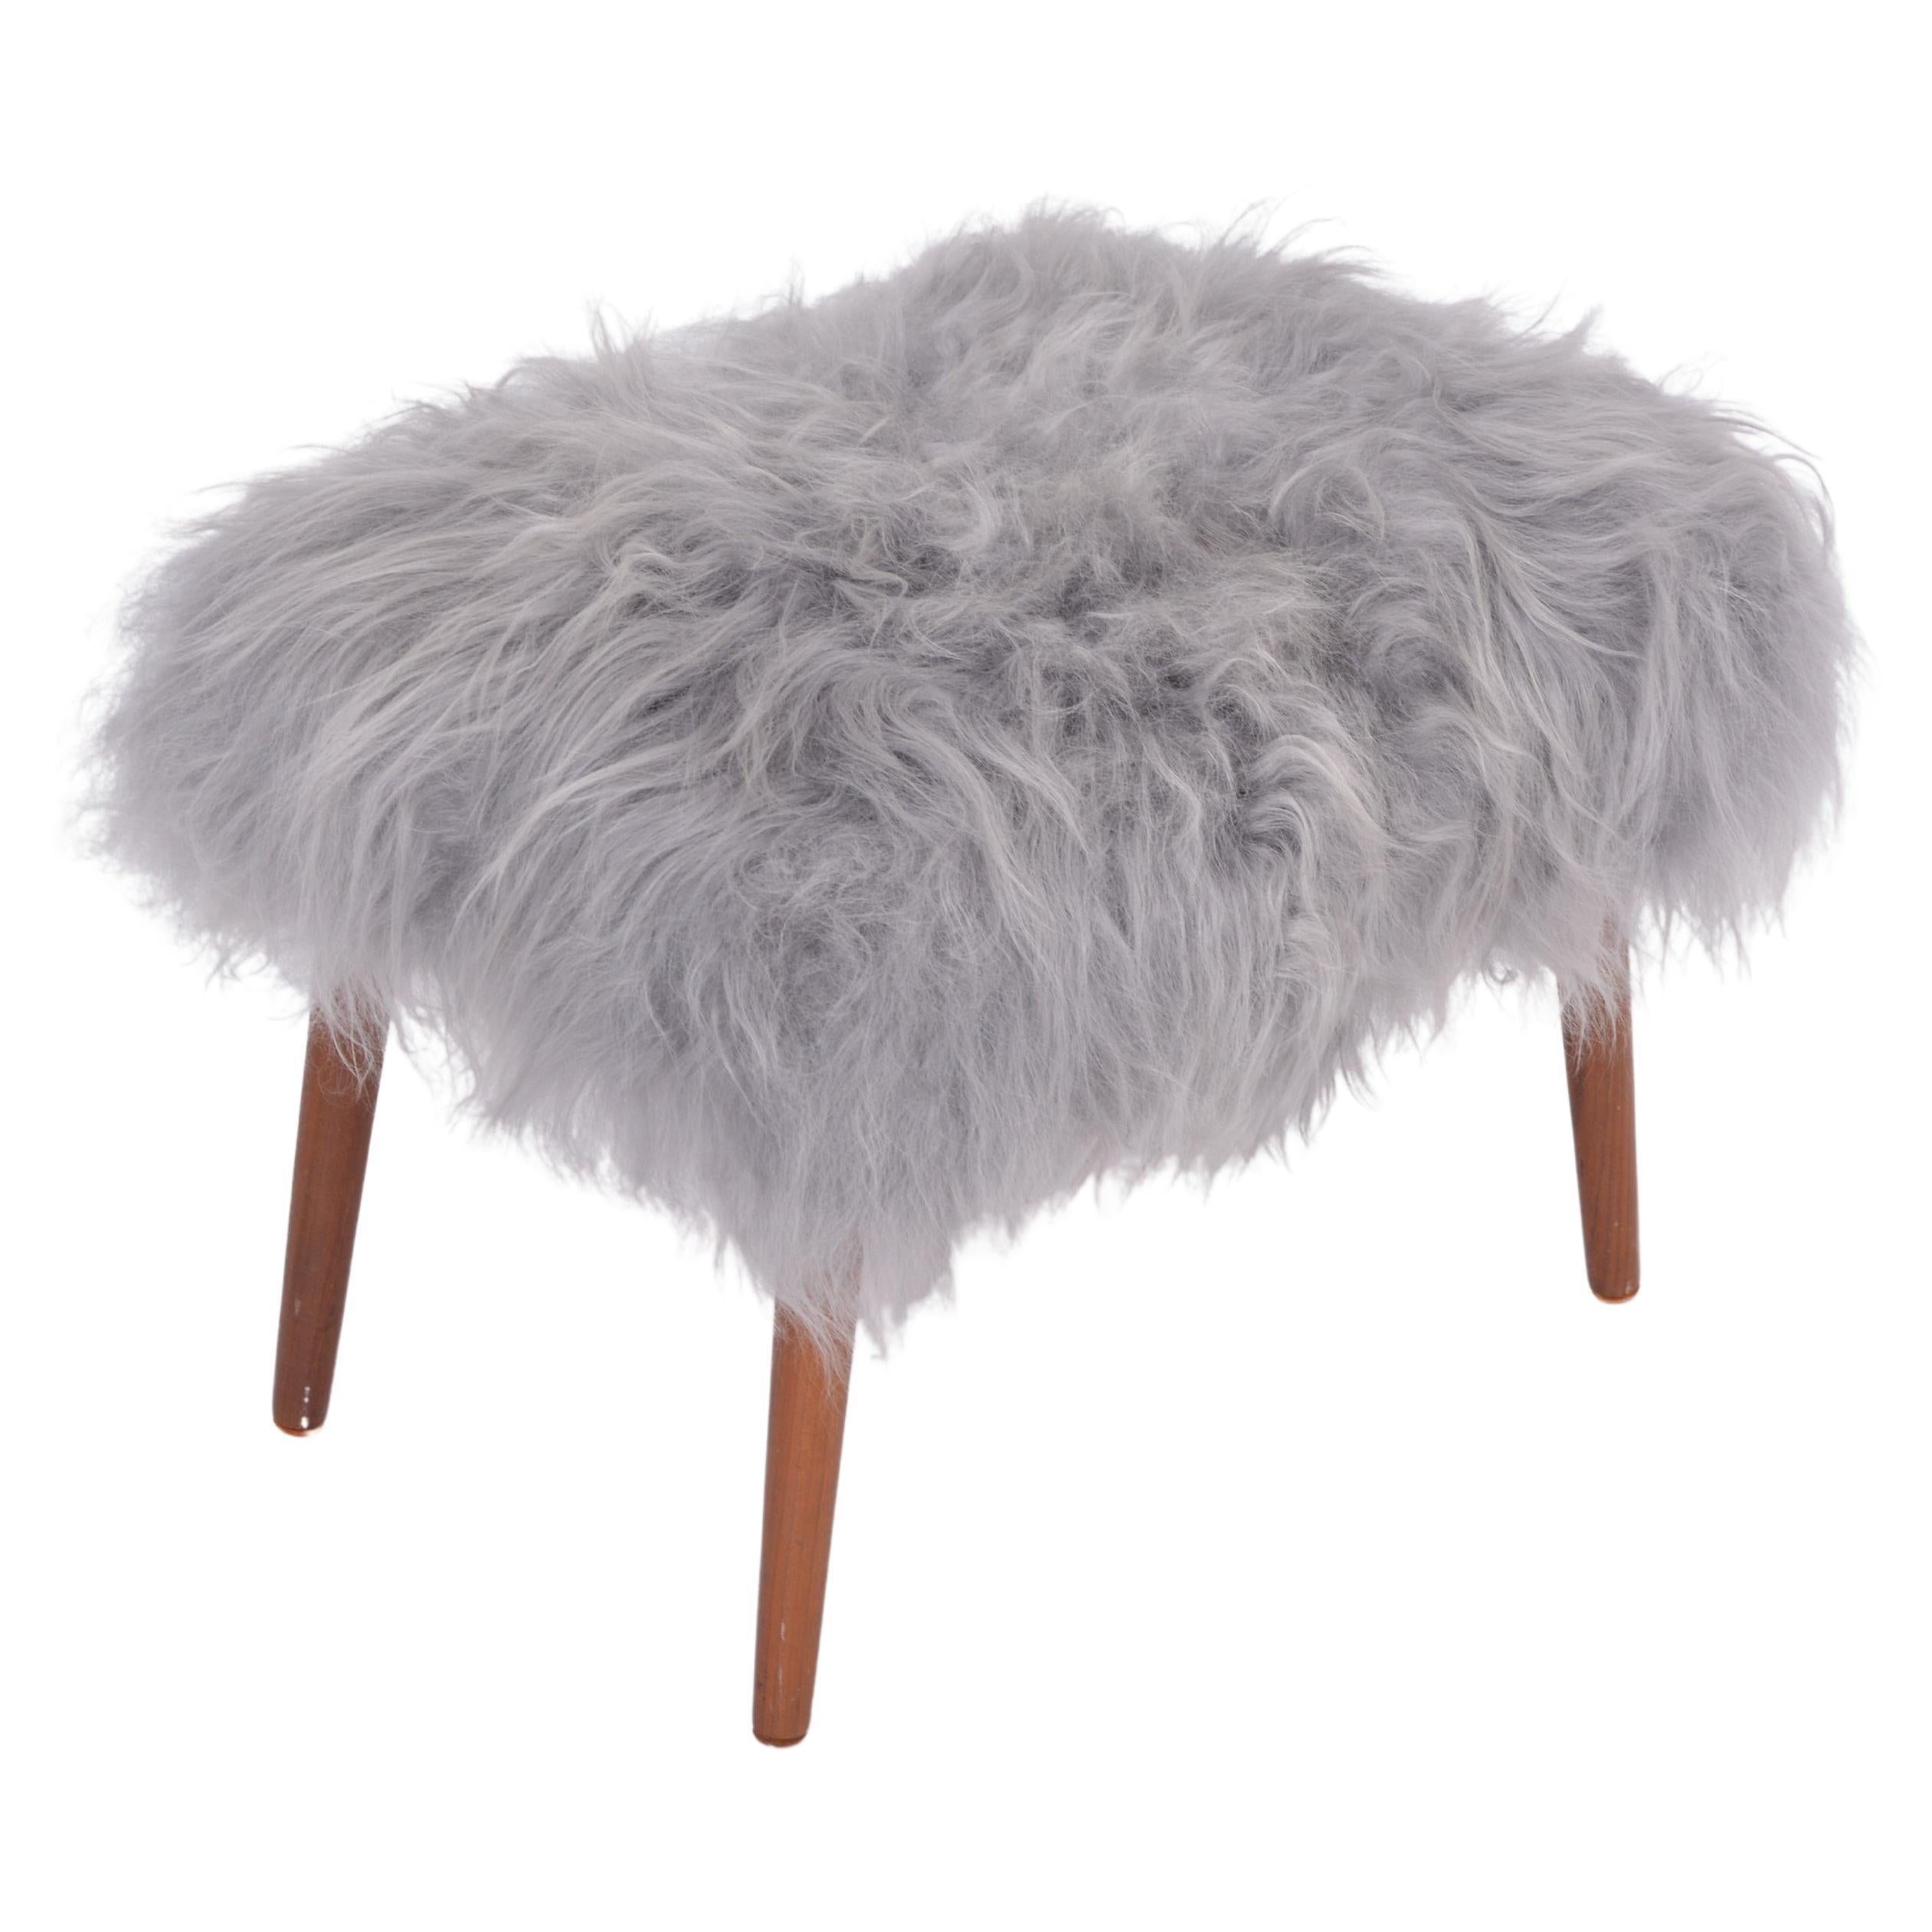 Danish Mid-century Modern stool reupholstered in grey sheep skin For Sale